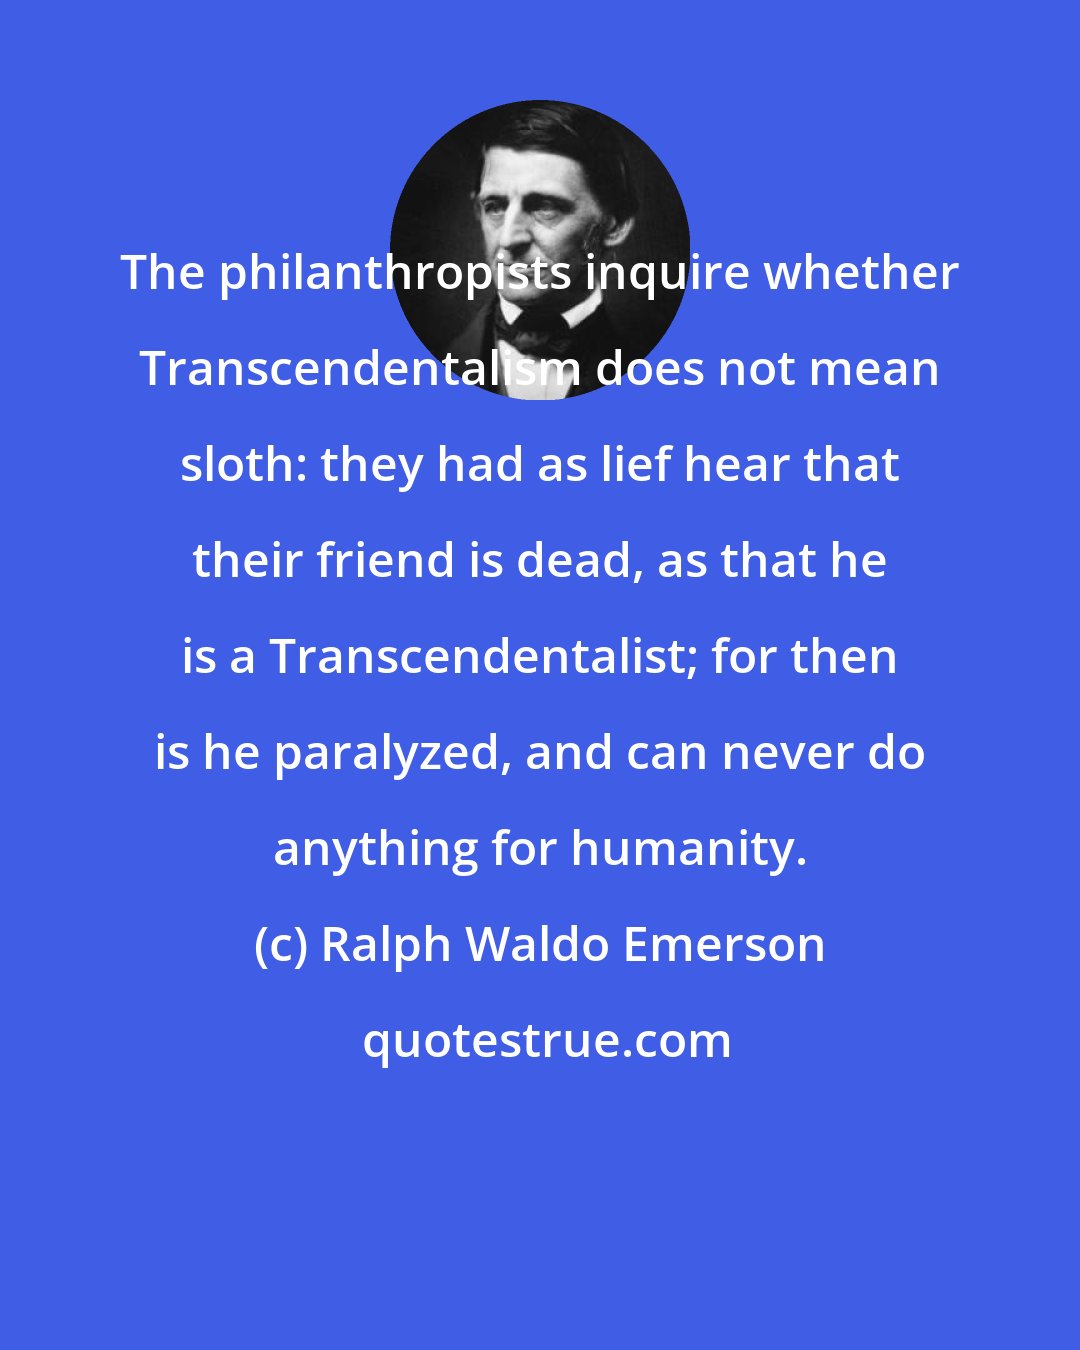 Ralph Waldo Emerson: The philanthropists inquire whether Transcendentalism does not mean sloth: they had as lief hear that their friend is dead, as that he is a Transcendentalist; for then is he paralyzed, and can never do anything for humanity.